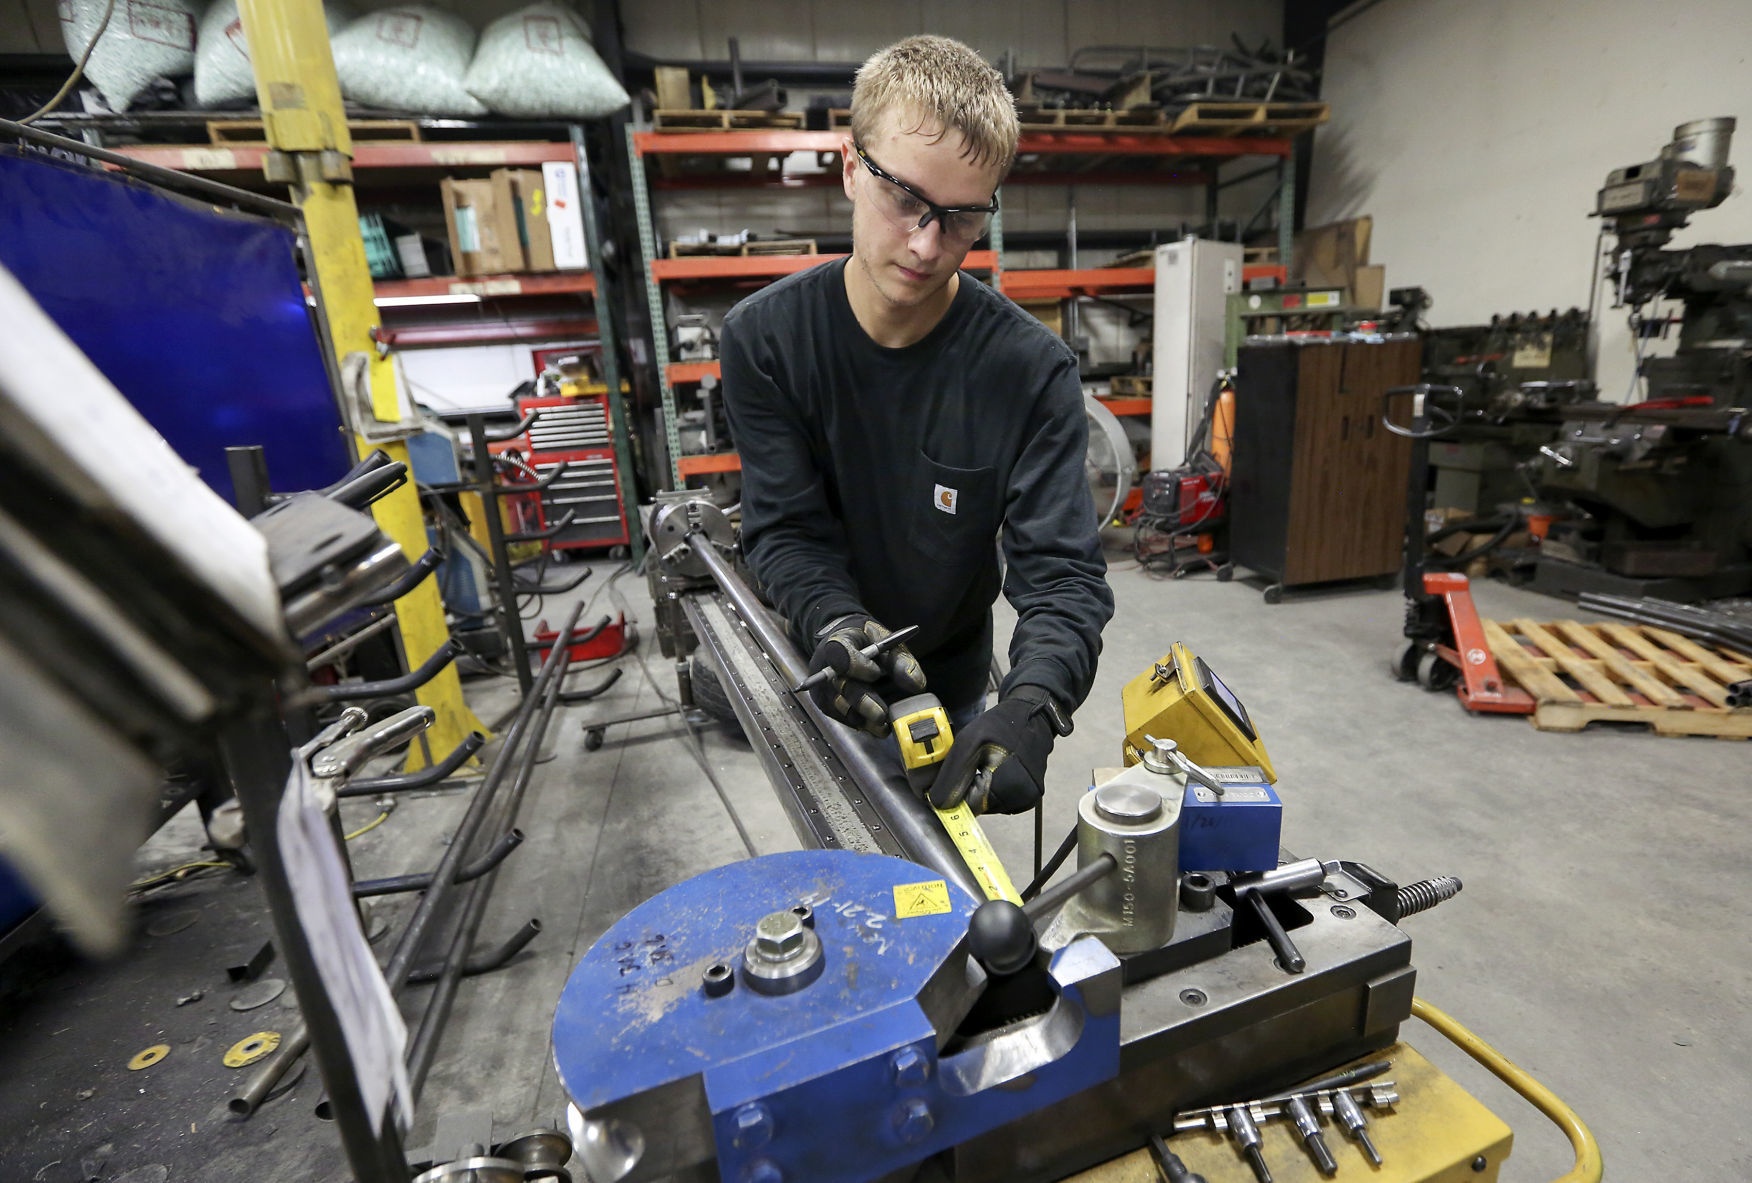 Brett Belscamper prepares a machine to bend tubing at 4x Innovations in Platteville, Wis., on Monday, Aug. 27, 2018.    PHOTO CREDIT: NICKI KOHL